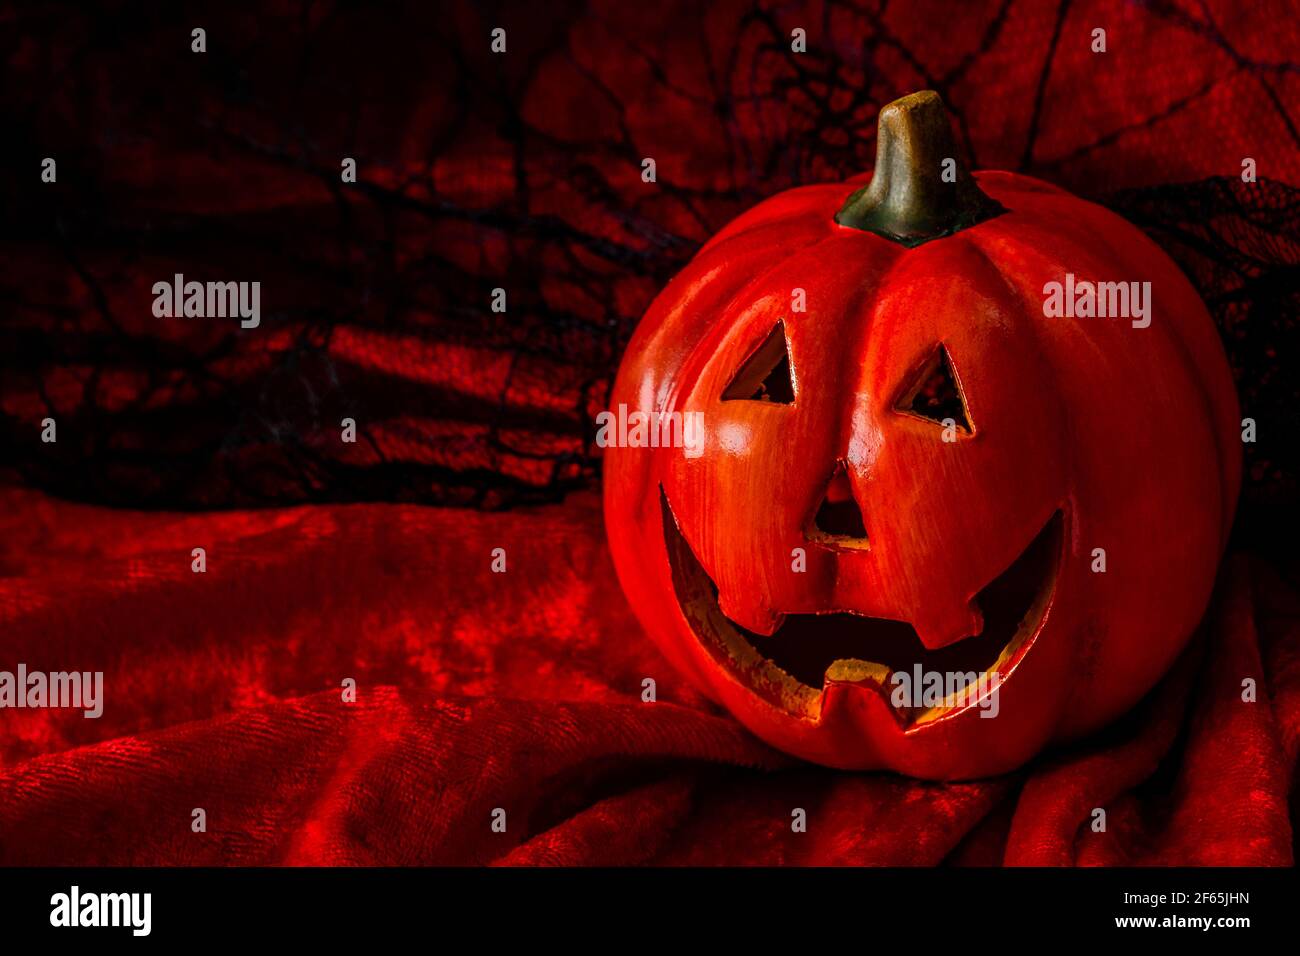 Halloween, trick or treat and fall holidays concept with a jack o'lantern pumpkin against a red, orange and spiderweb black lace background with copy Stock Photo